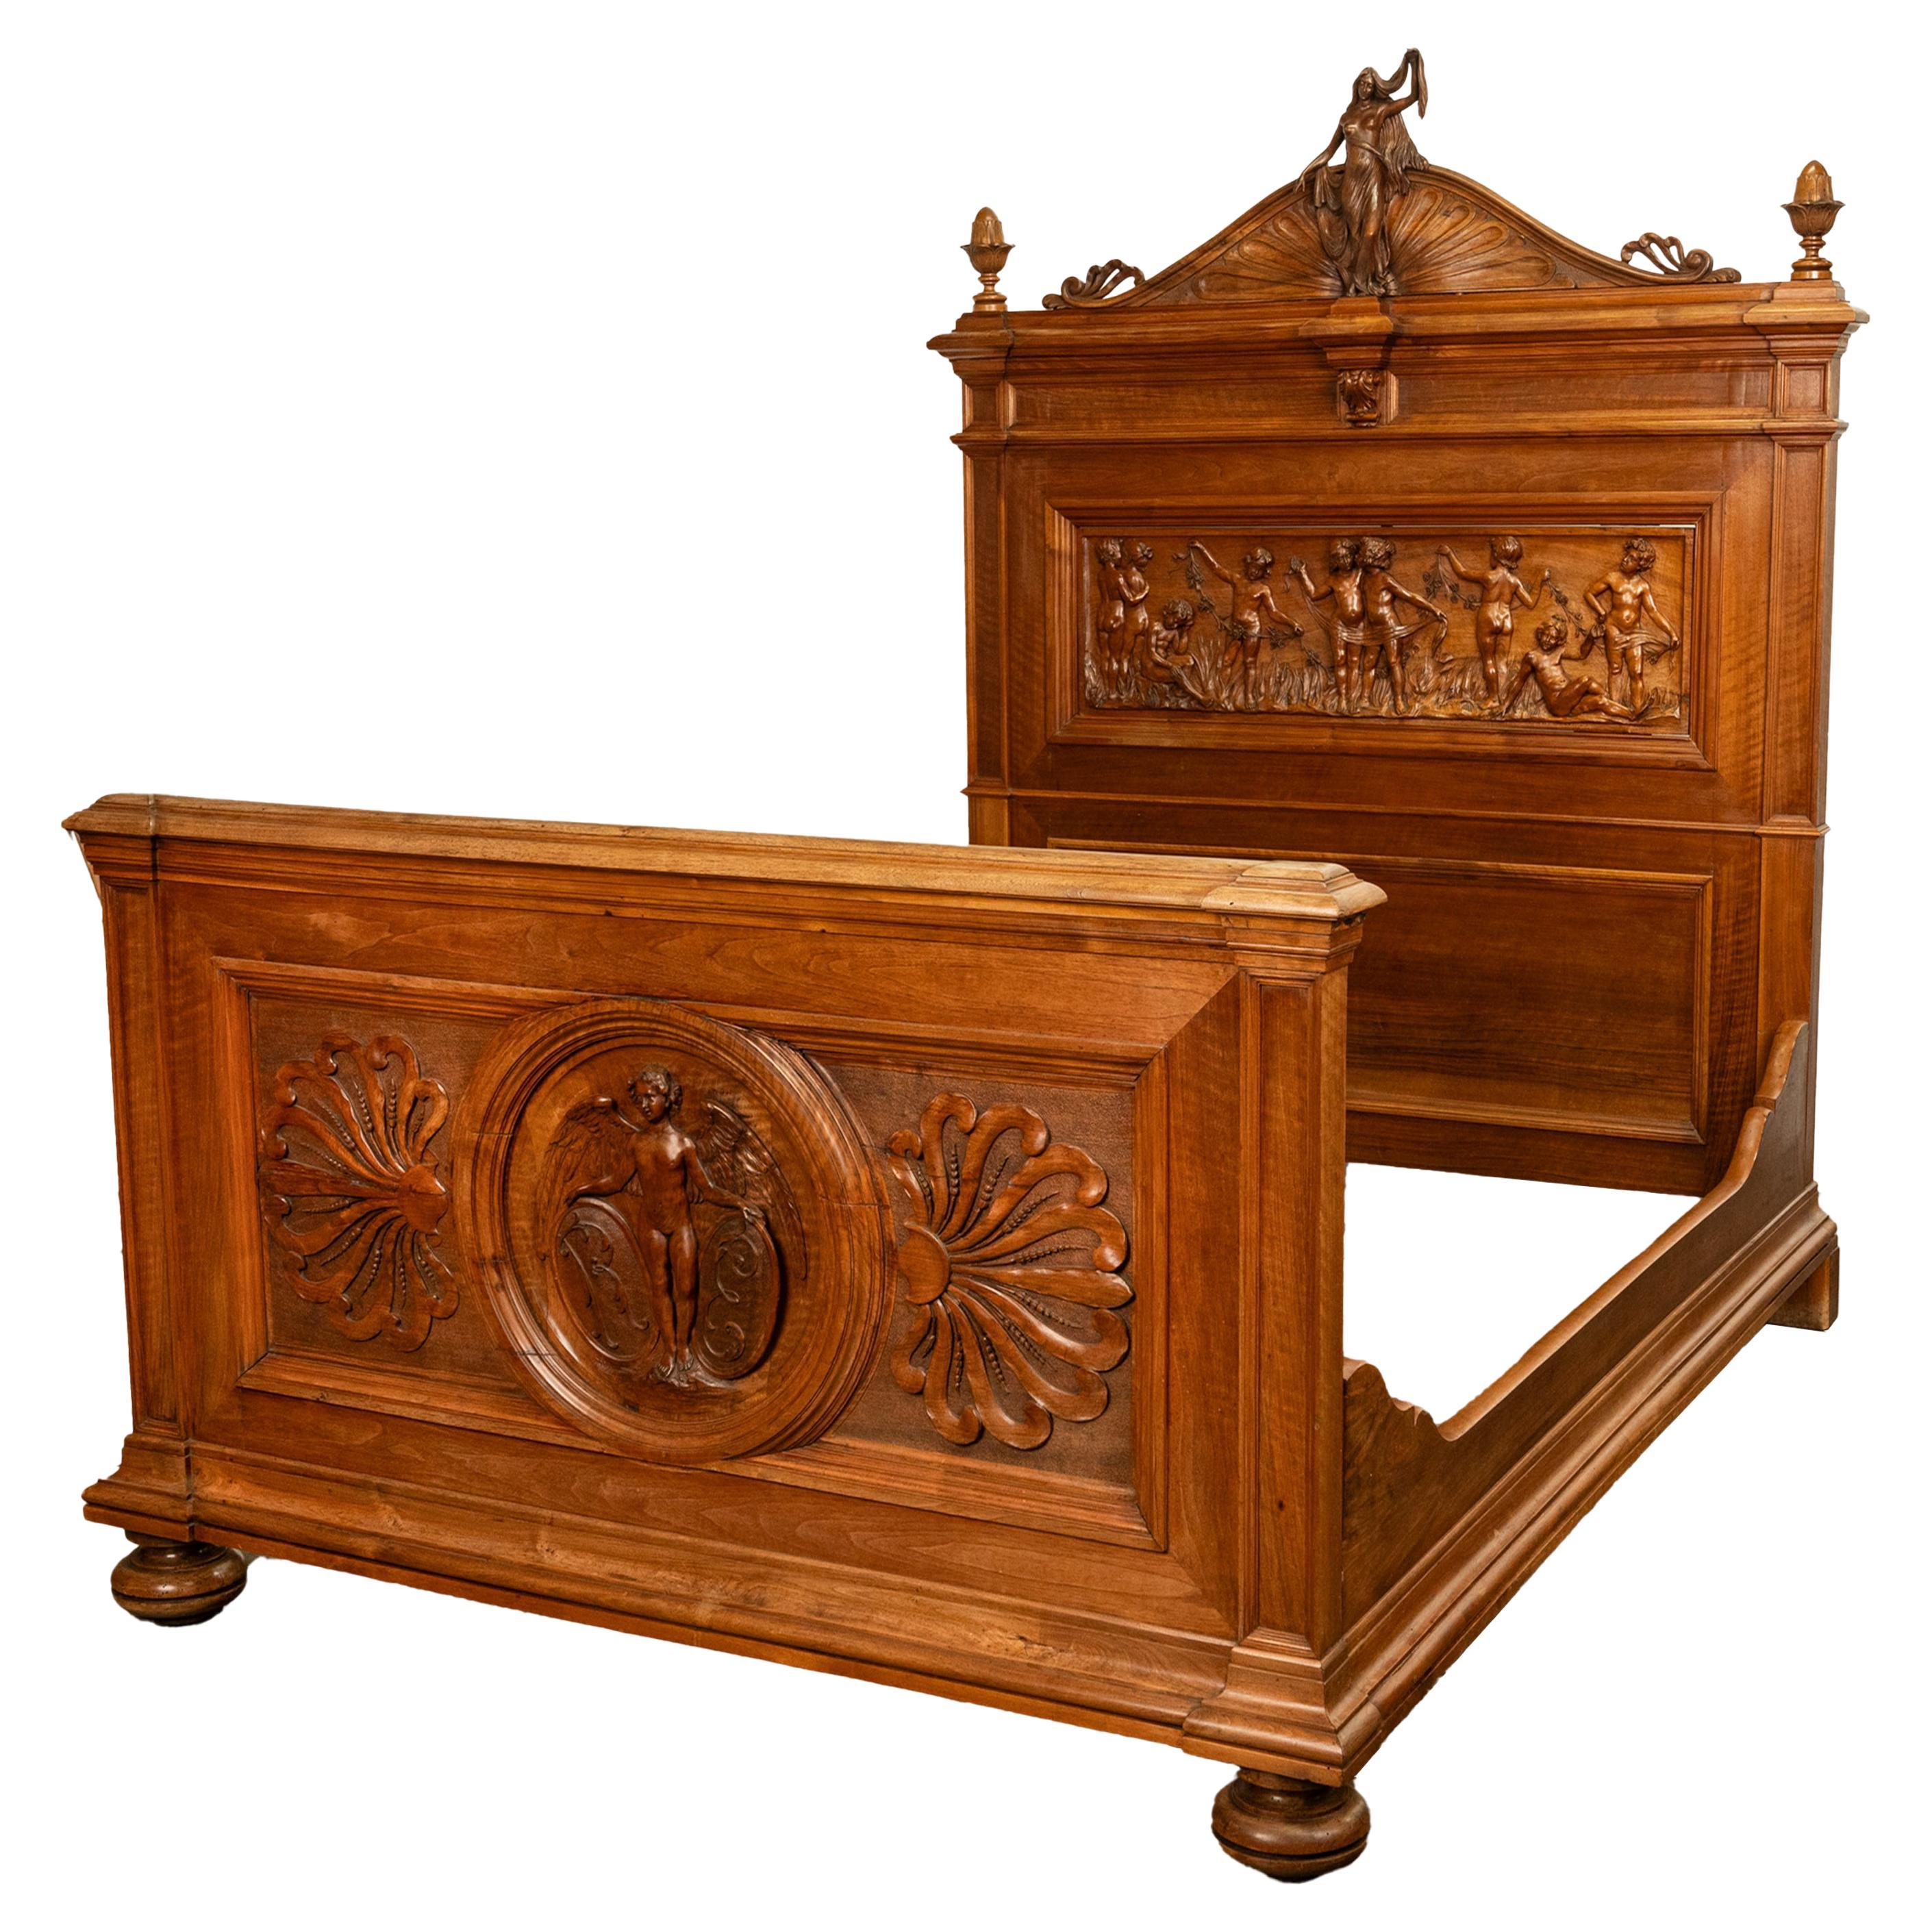 Antique carved Italian walnut bed in the Neoclassical taste, circa 1870.
The bed with incredible carvings throughout, to the top of the headboard is a removable crown carved with a maiden holding her long tresses of hair and wearing diaphanous